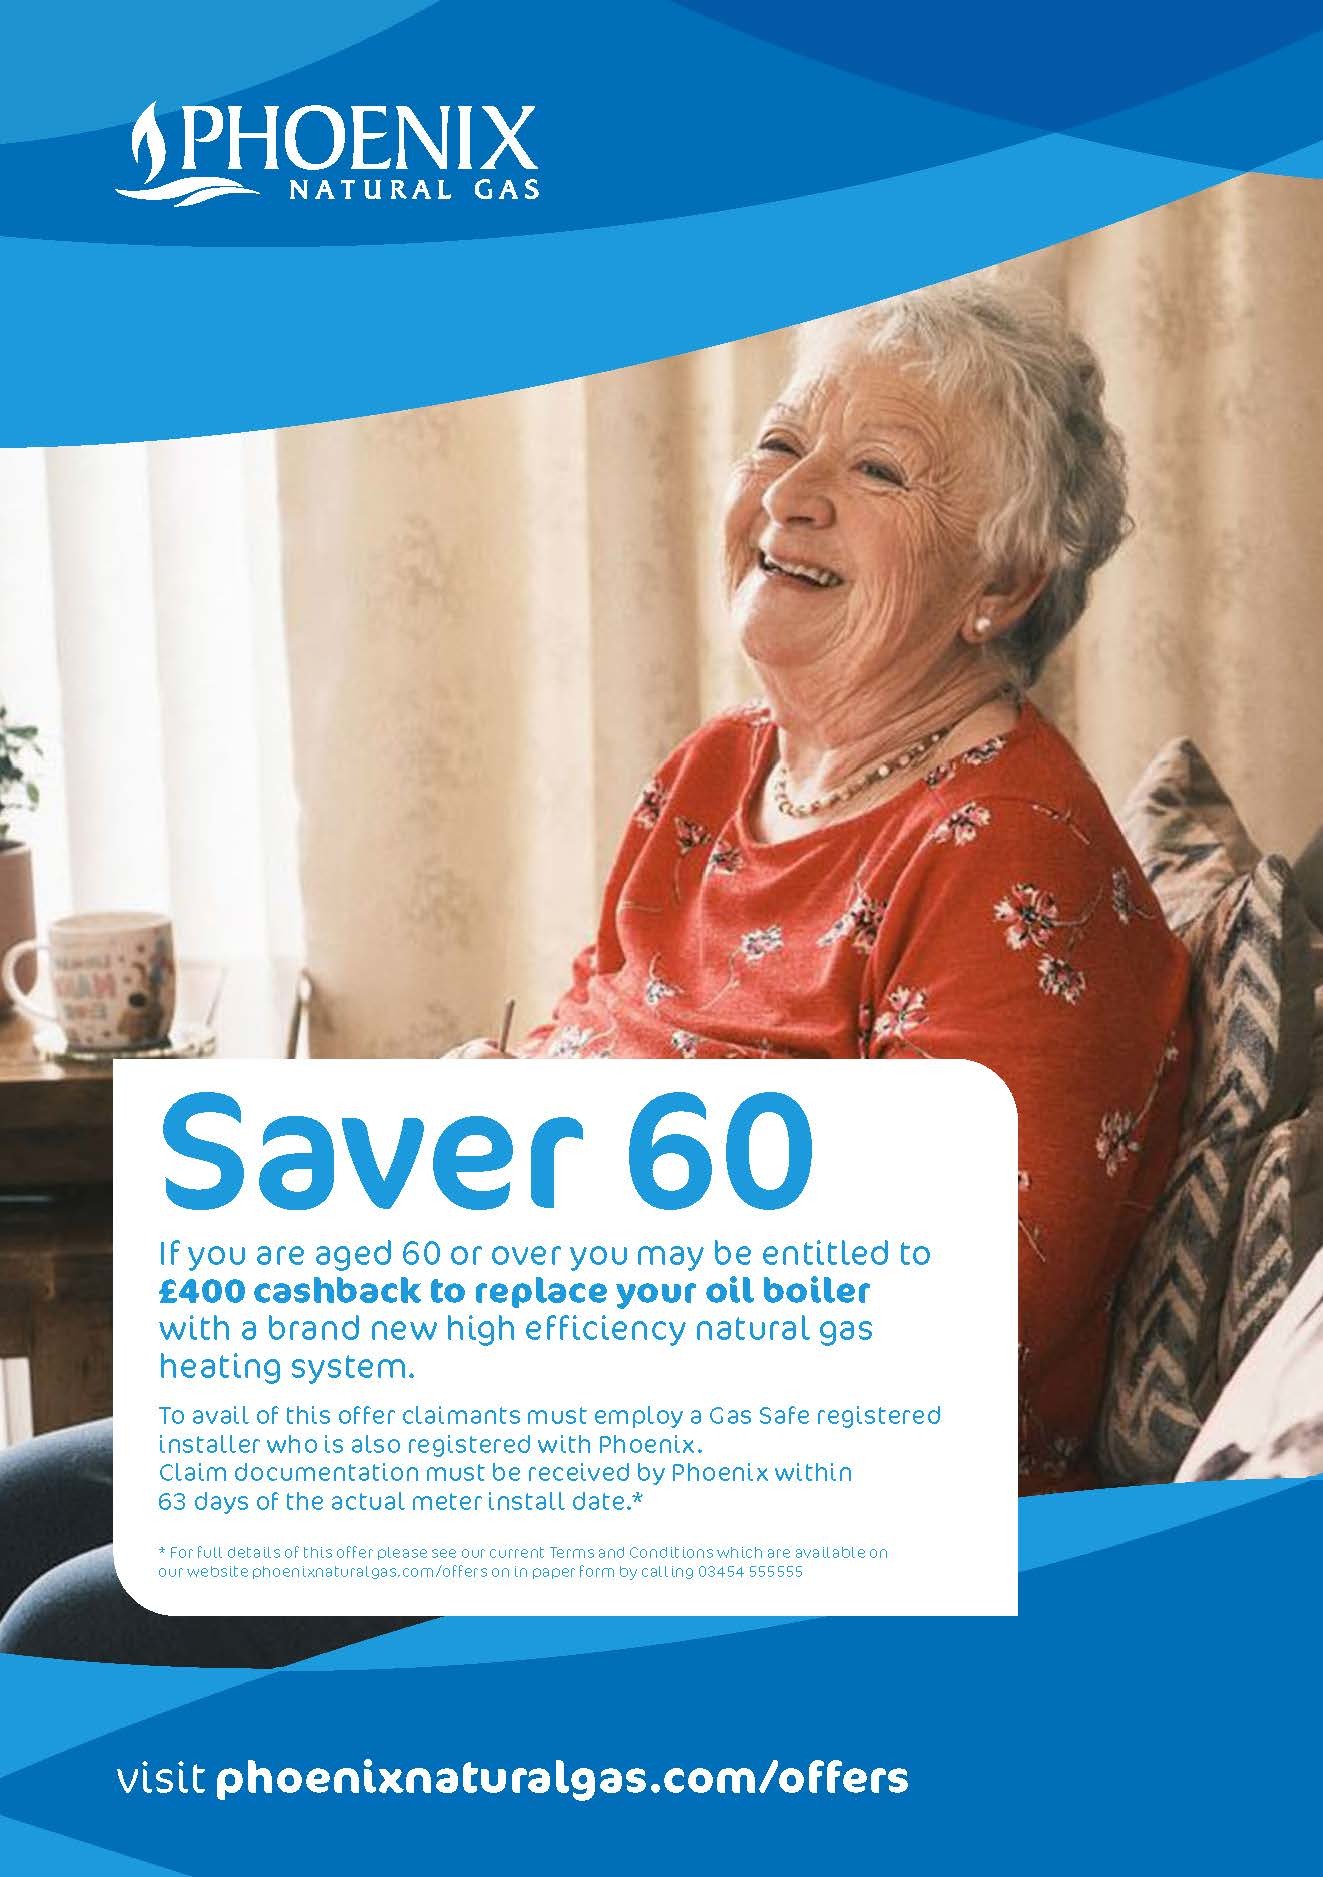 Saver 60, if you are aged 60 or over you may be entitled to £400 cashback to replace your oil boiler with a brand new high efficiency Natural Gas heating system.